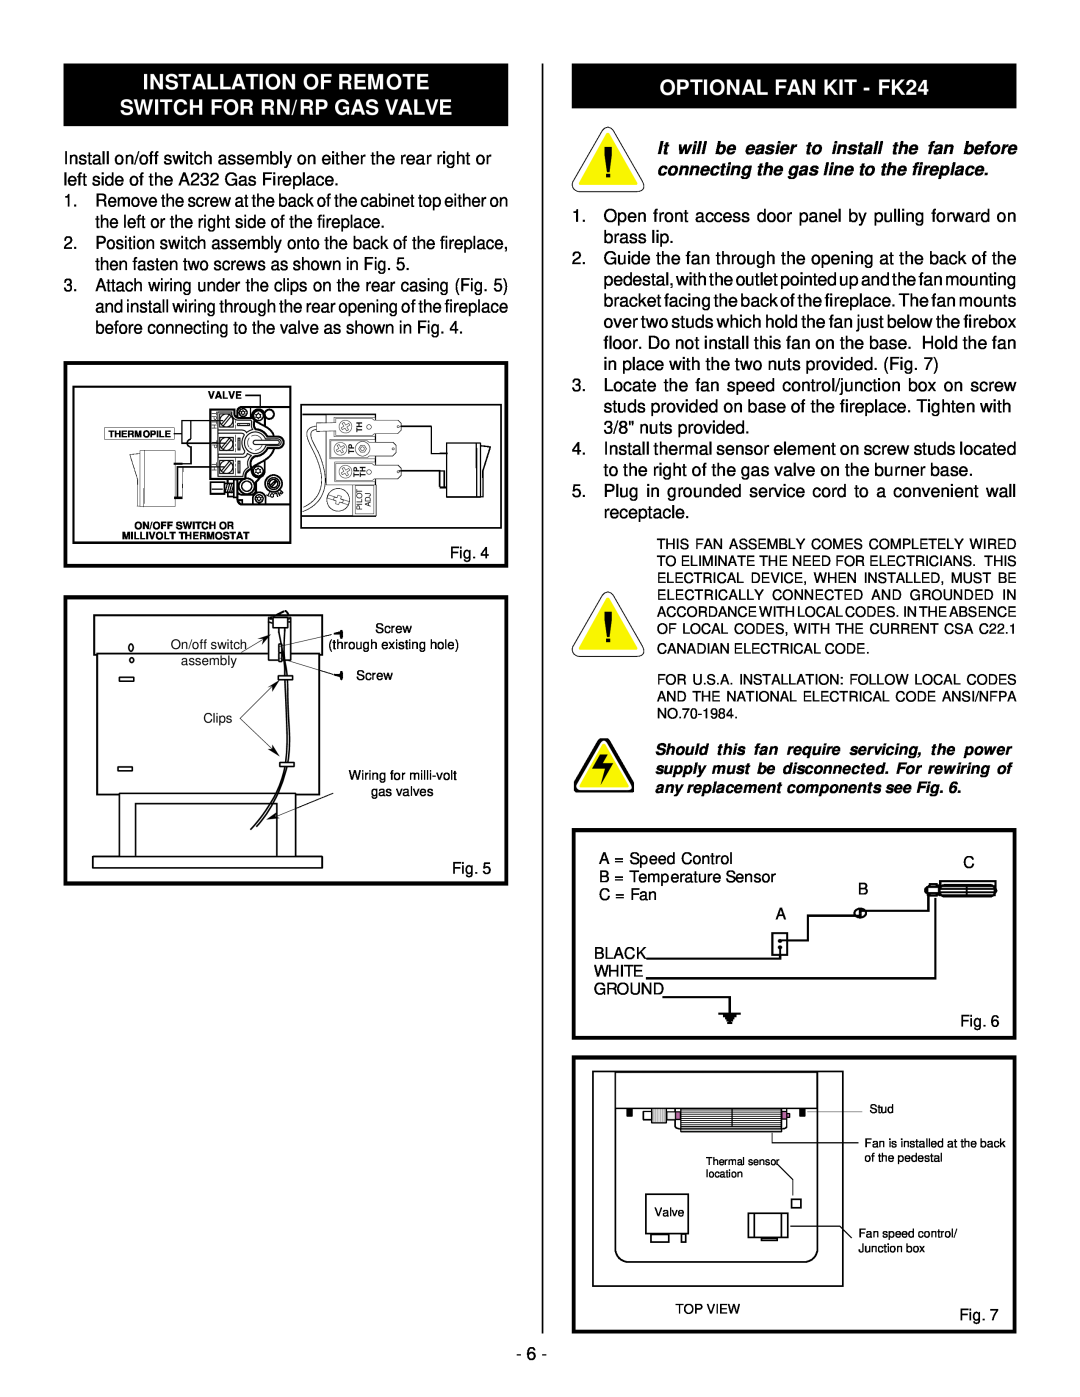 Vermont Casting A232 installation instructions Installation Of Remote Switch For Rn/Rp Gas Valve, OPTIONAL FAN KIT - FK24 